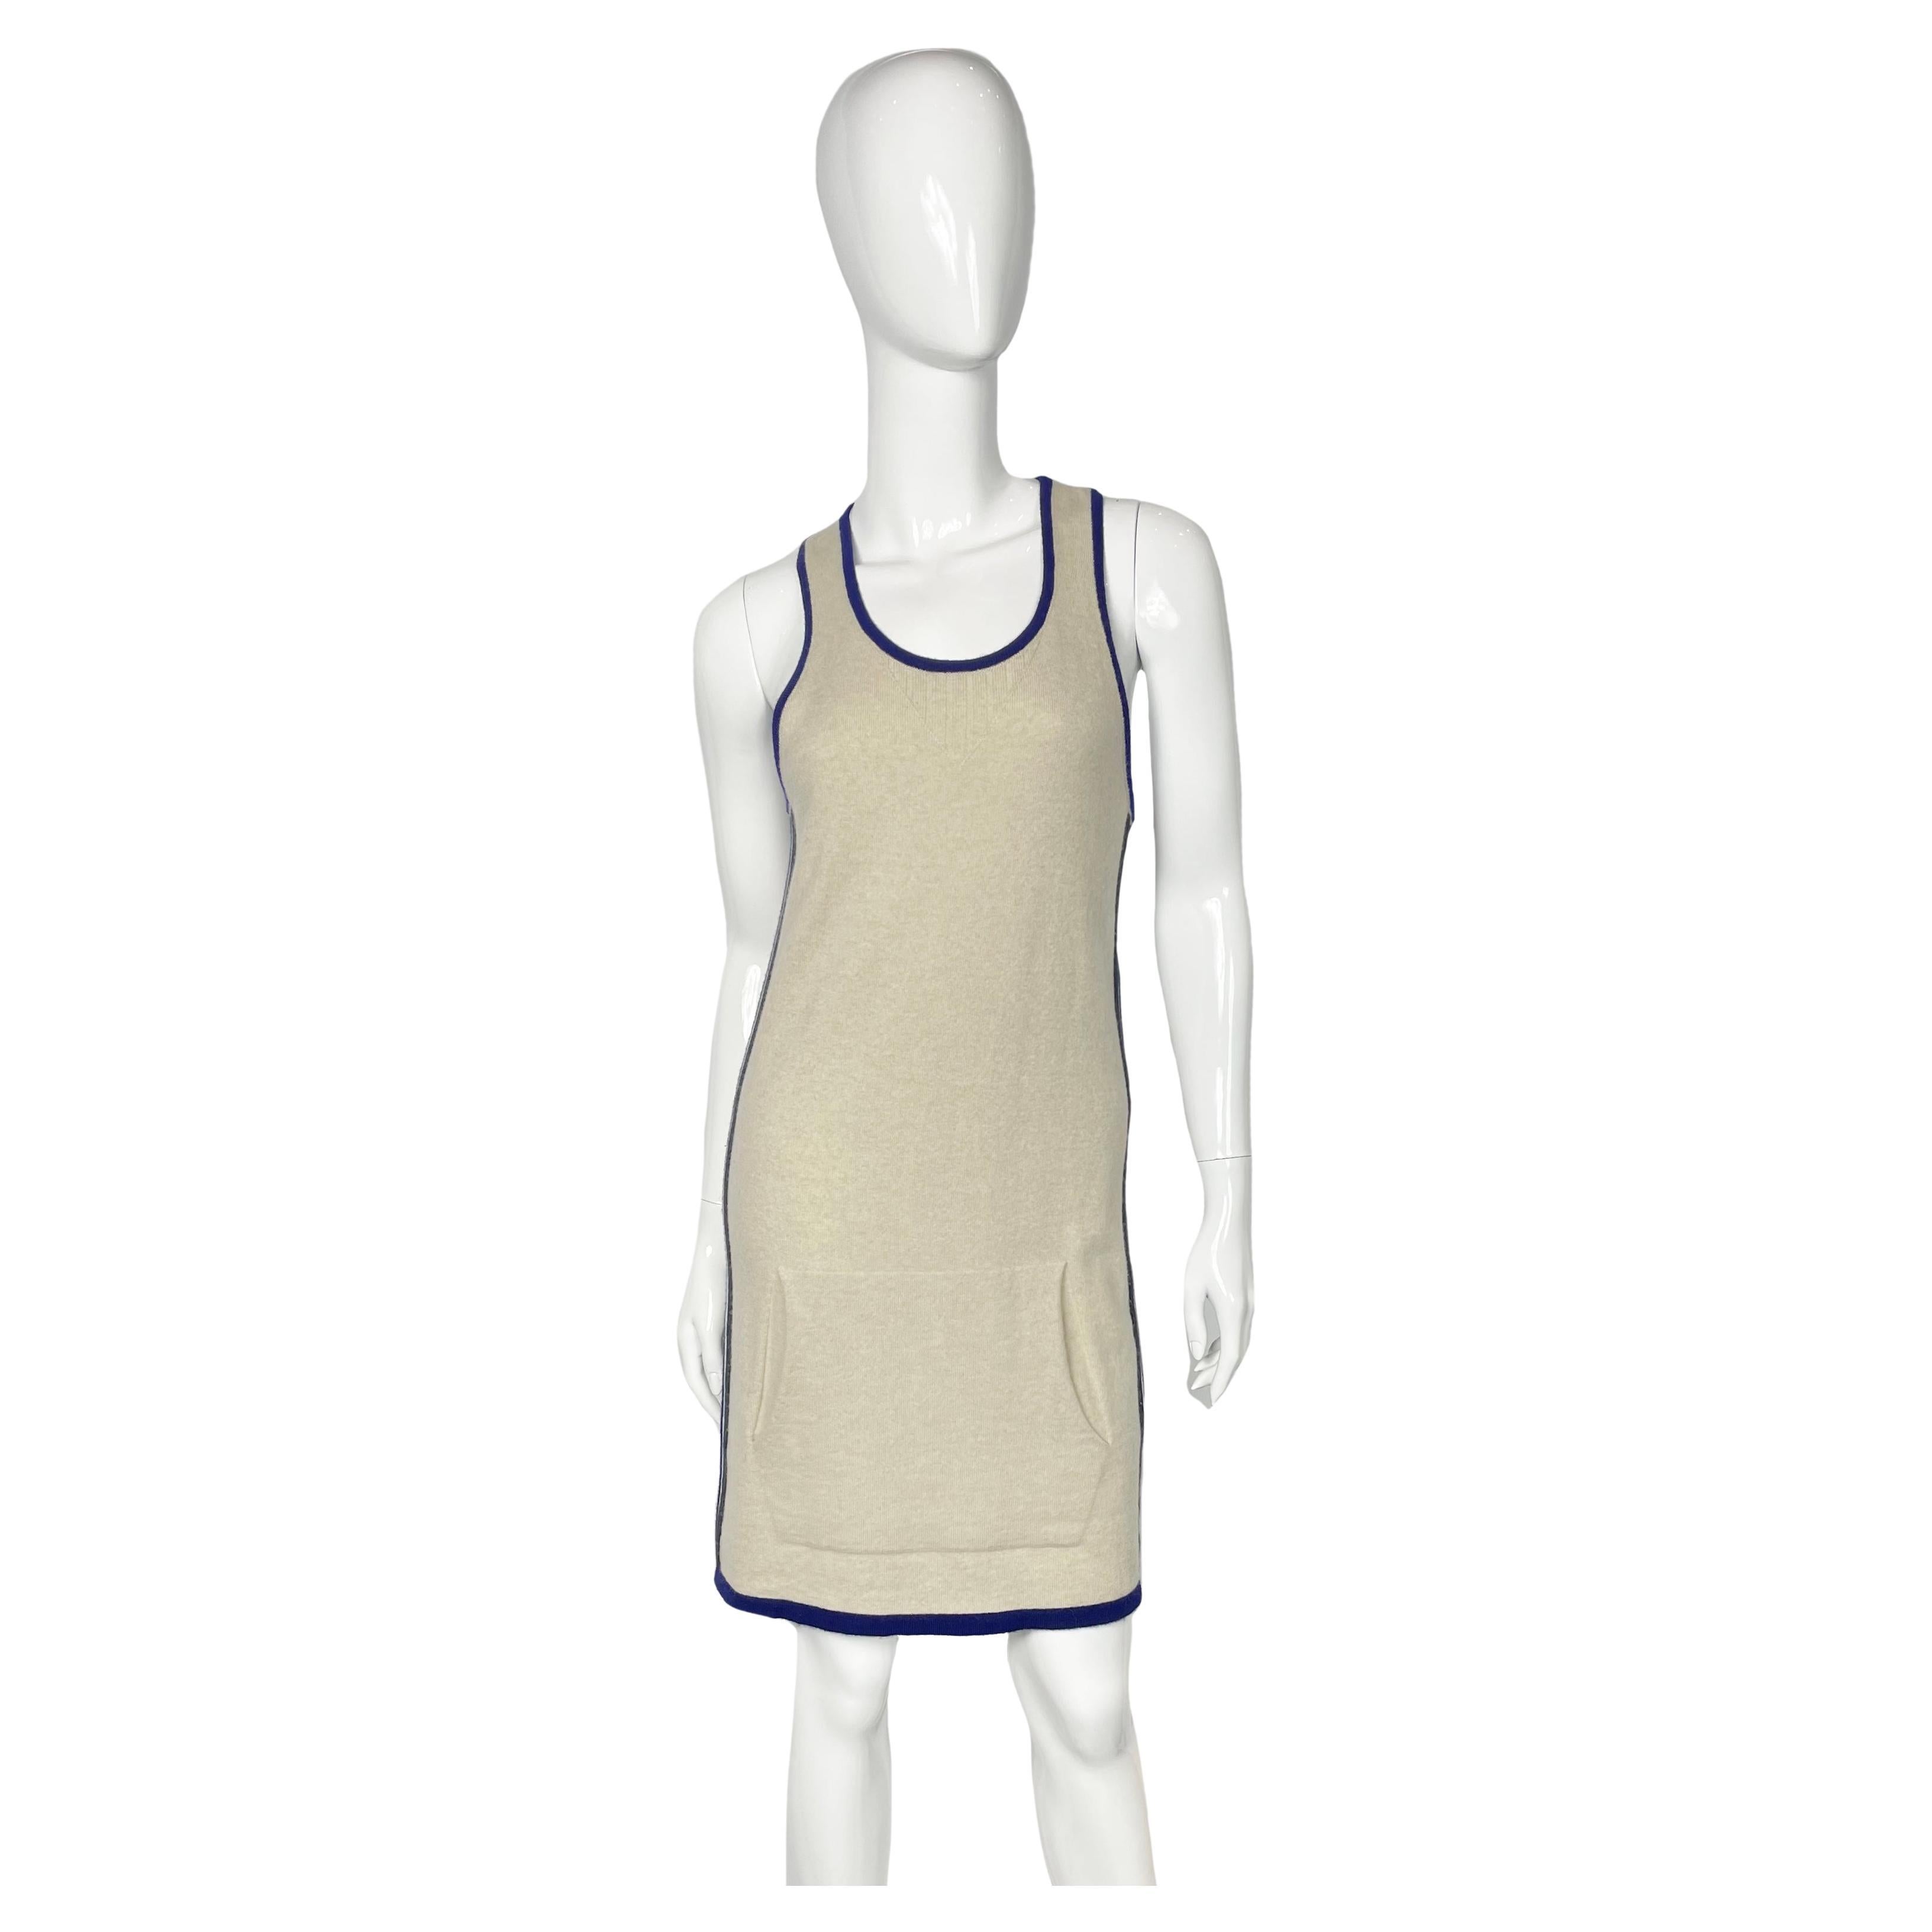 Chanel sand cashmere tank kangaroo pocket dress with blue piping, 2010s For Sale